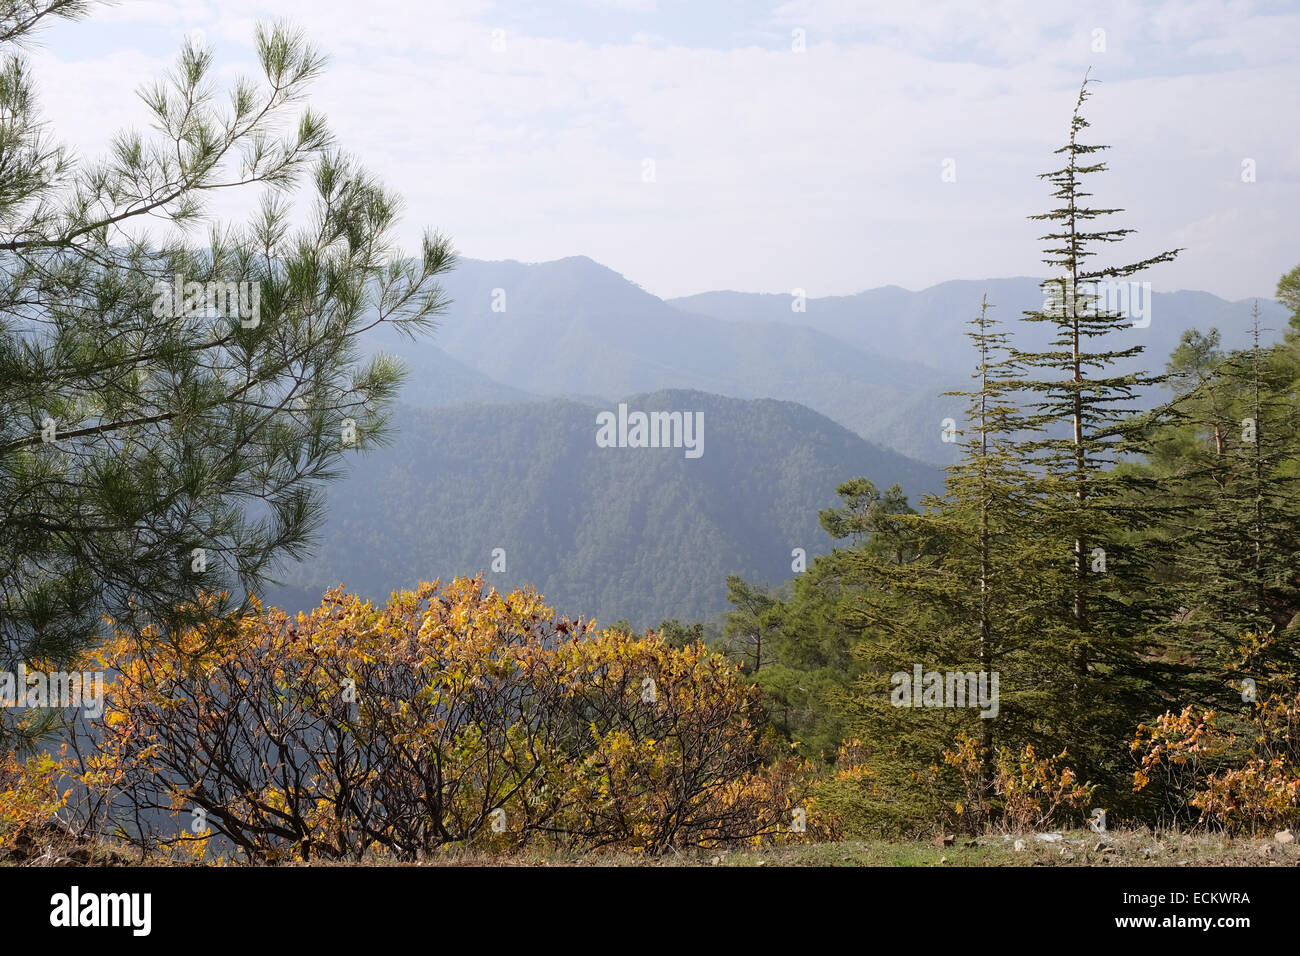 Scenery in the Troodos Mountains, Cedar Valley, Cyprus Stock Photo